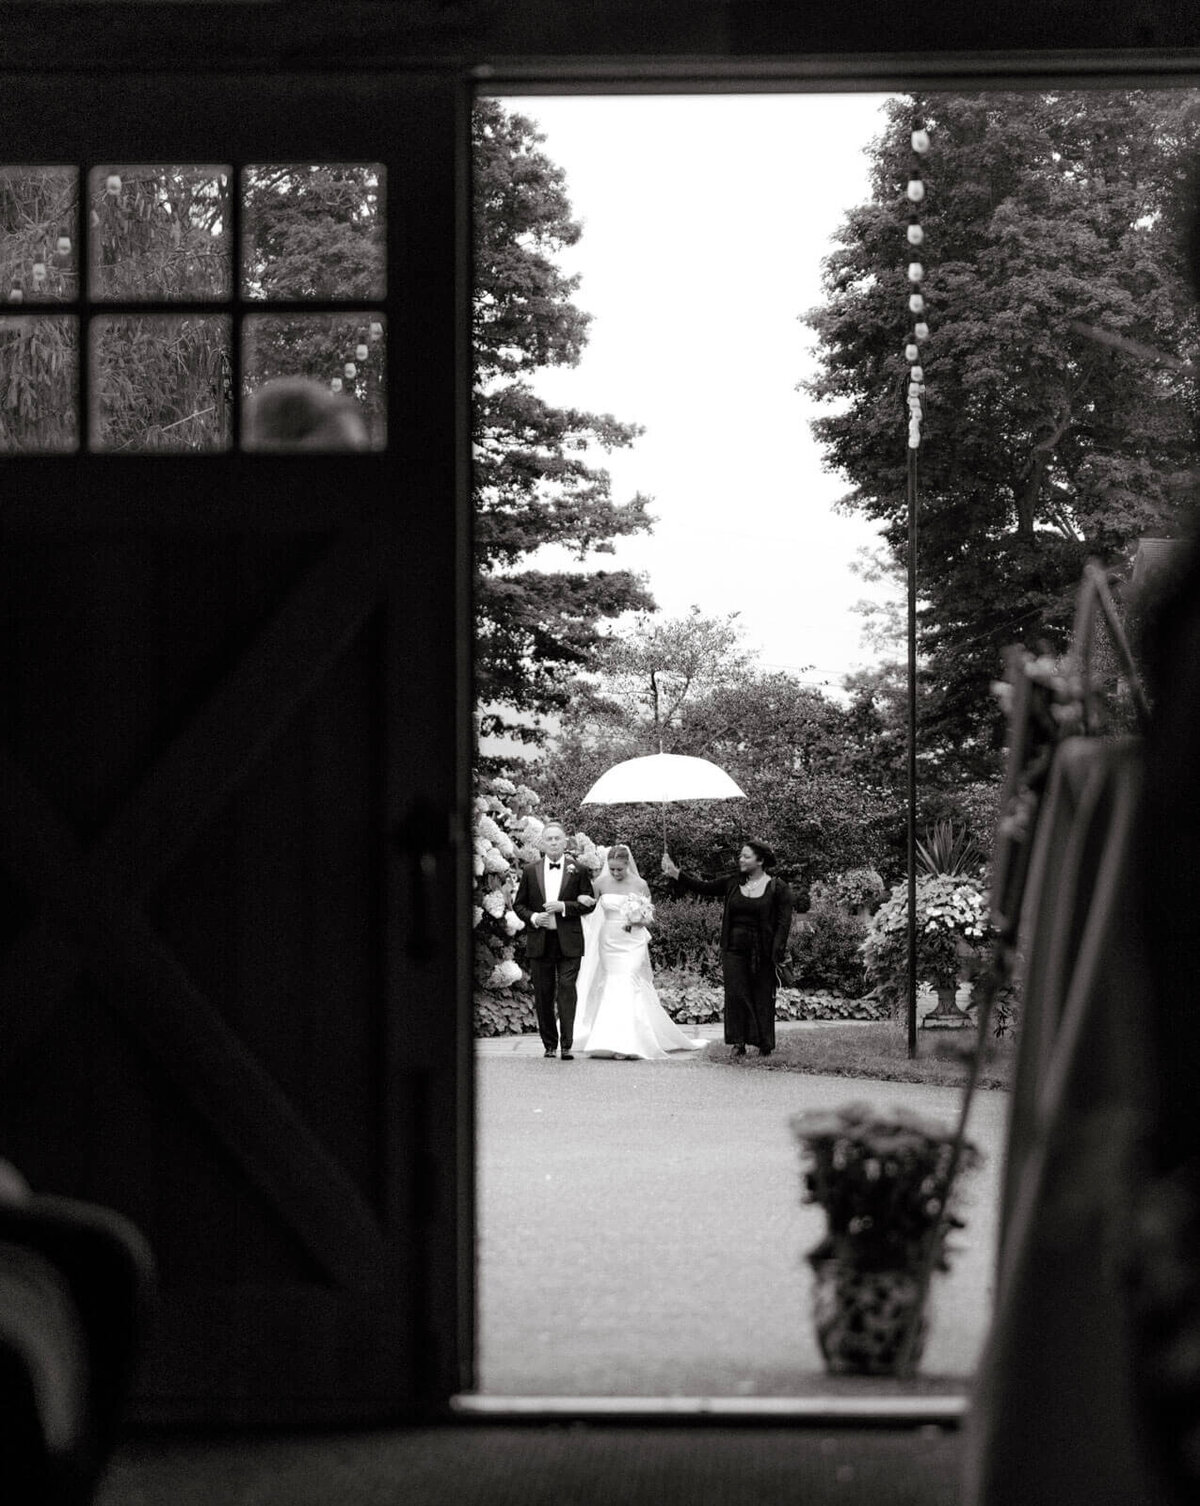 Escorted by her father, the bride is walking towards the wedding ceremony. A girl is holding a white umbrella for the bride.